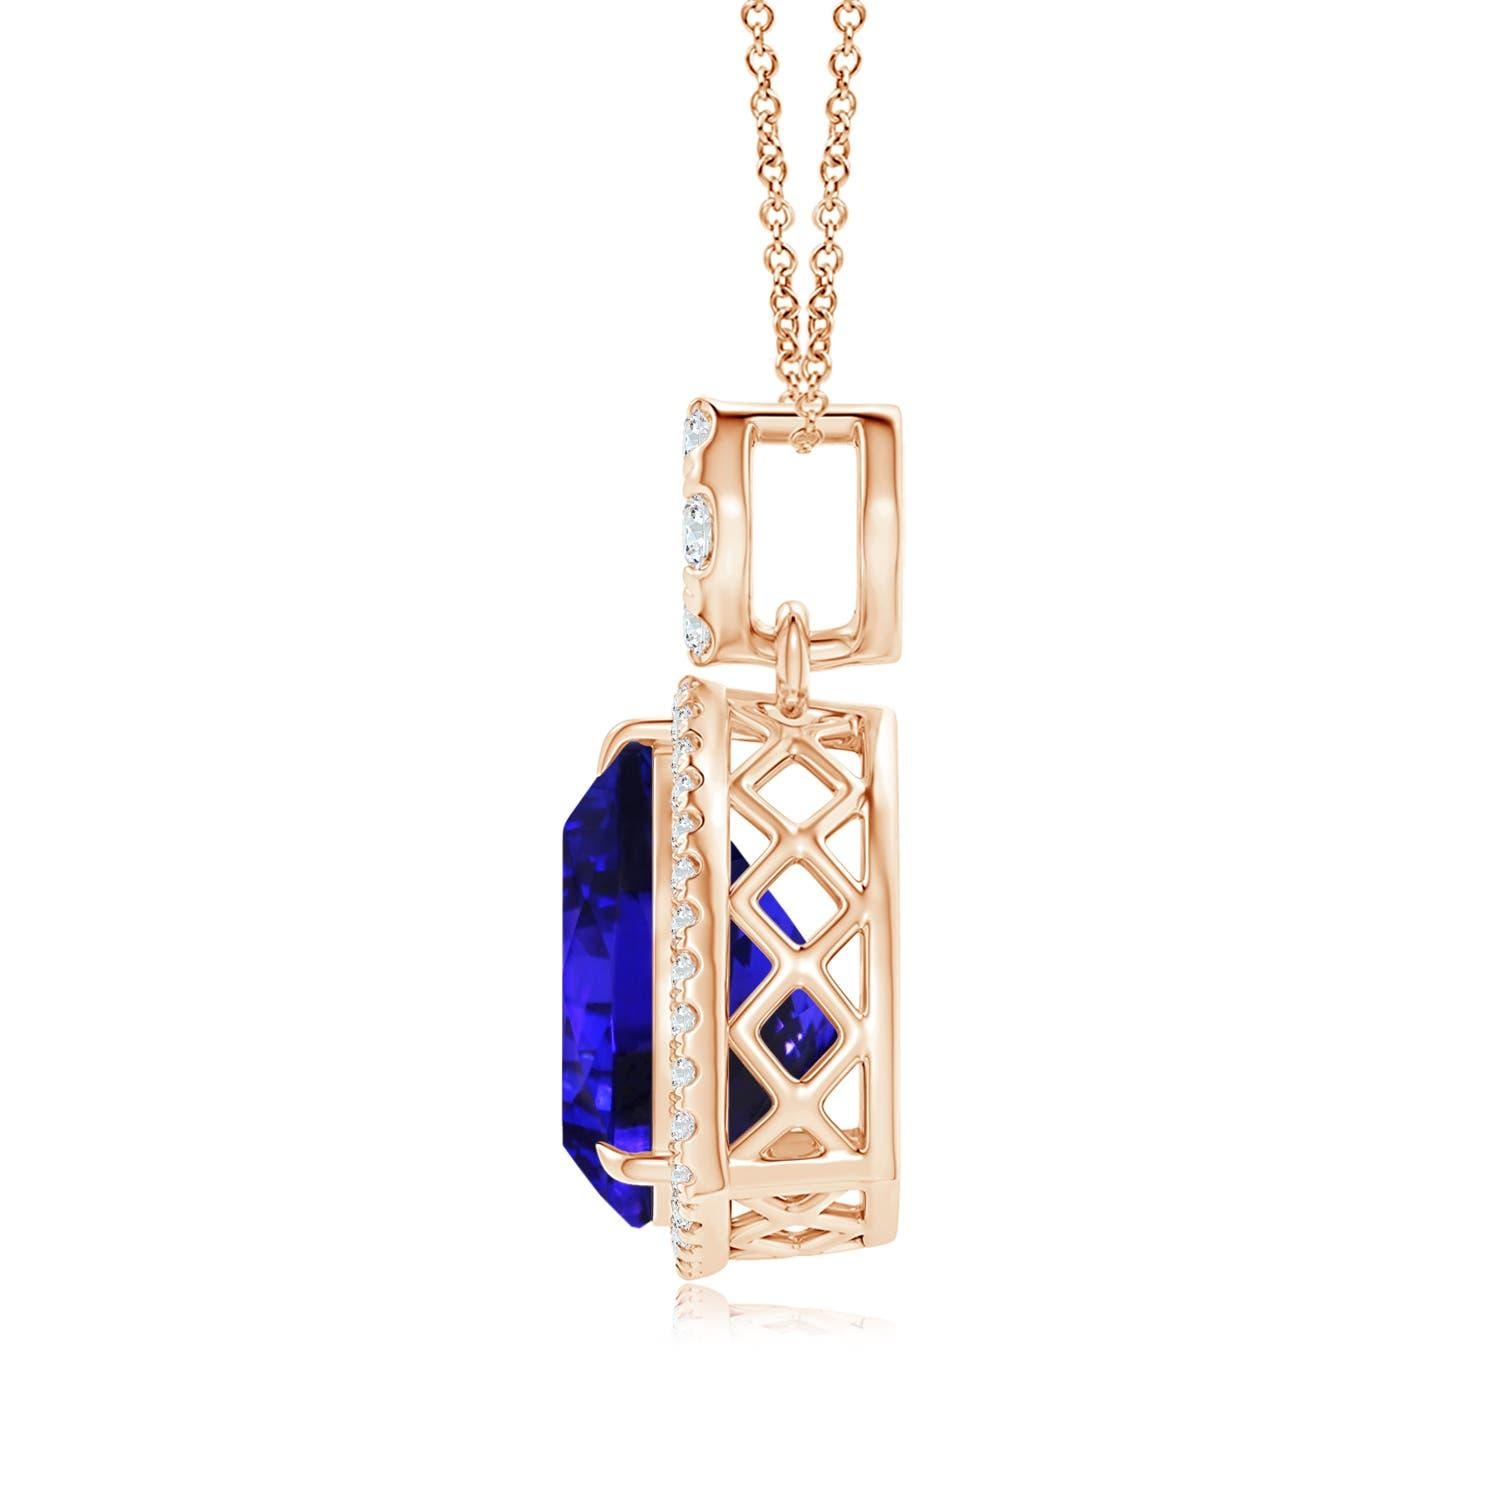 Connected to a diamond-studded bale is a GIA certified trillion tanzanite halo pendant in 14k rose gold. While the halo diamonds are secured in U pave settings, the bale features prong-set diamonds in a cluster. The chequered filigree on the metal